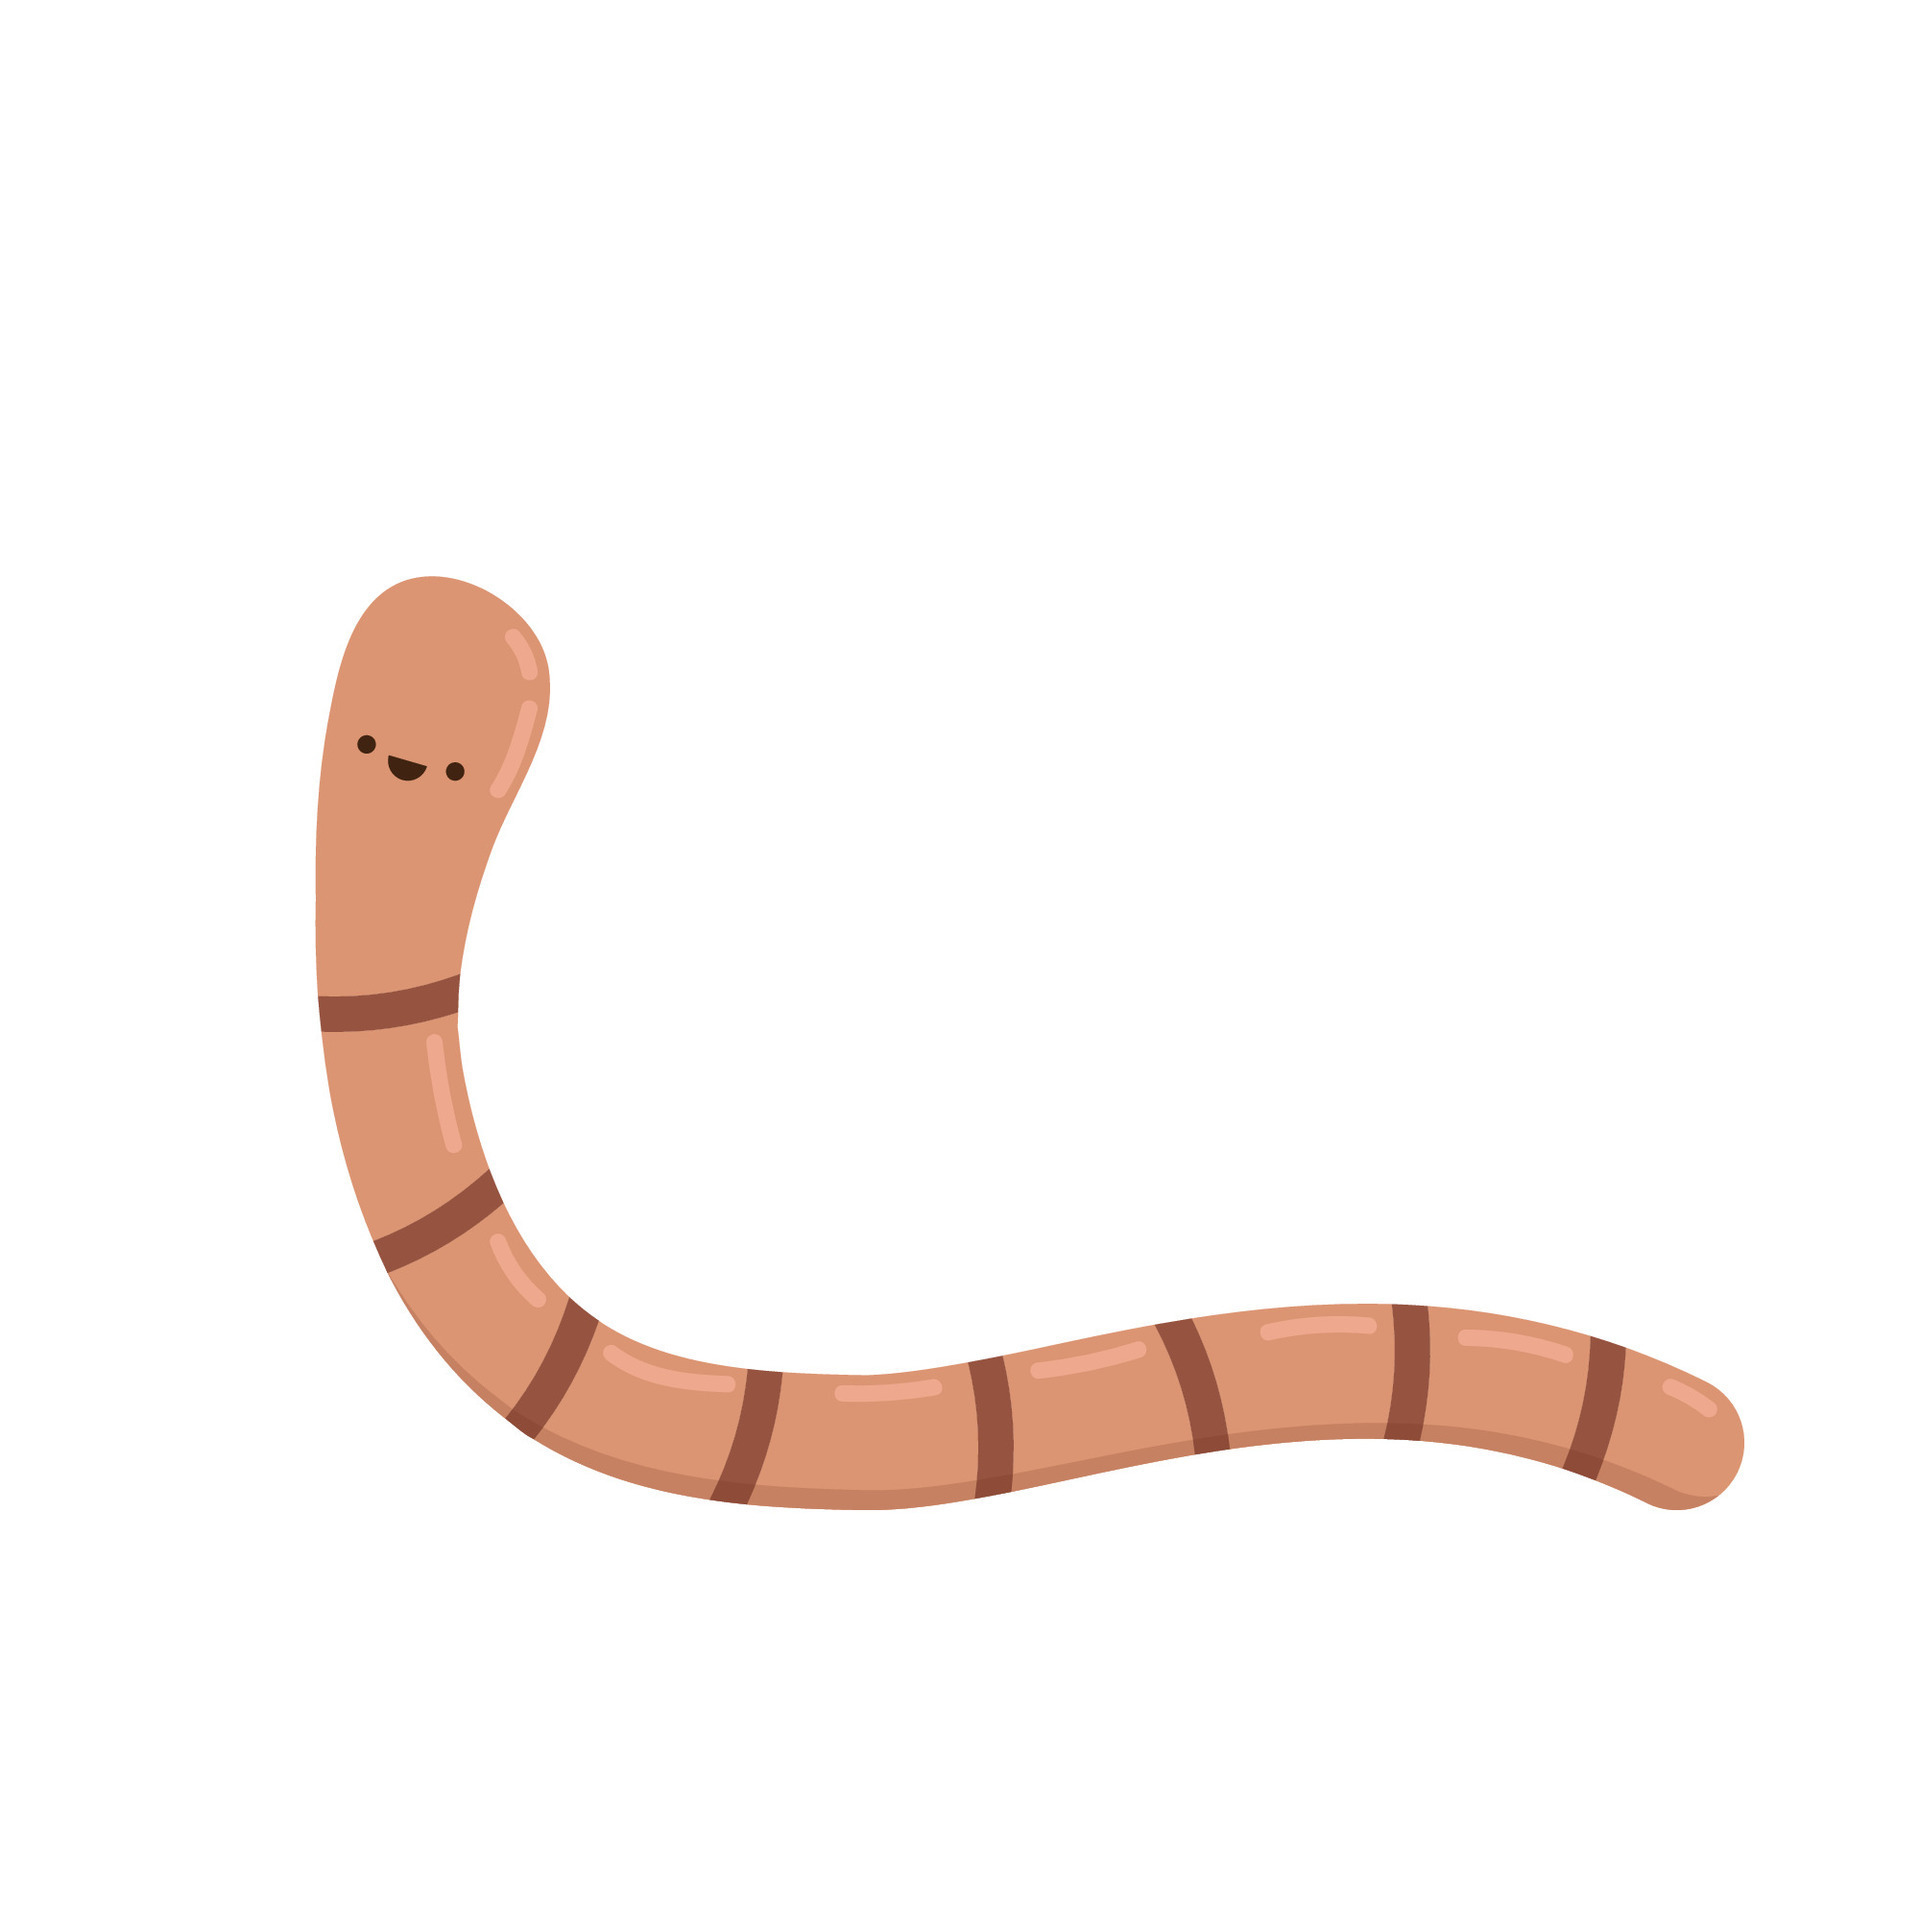 https://static.vecteezy.com/system/resources/previews/034/204/452/original/earthworm-cartoon-earthworm-on-white-background-free-vector.jpg